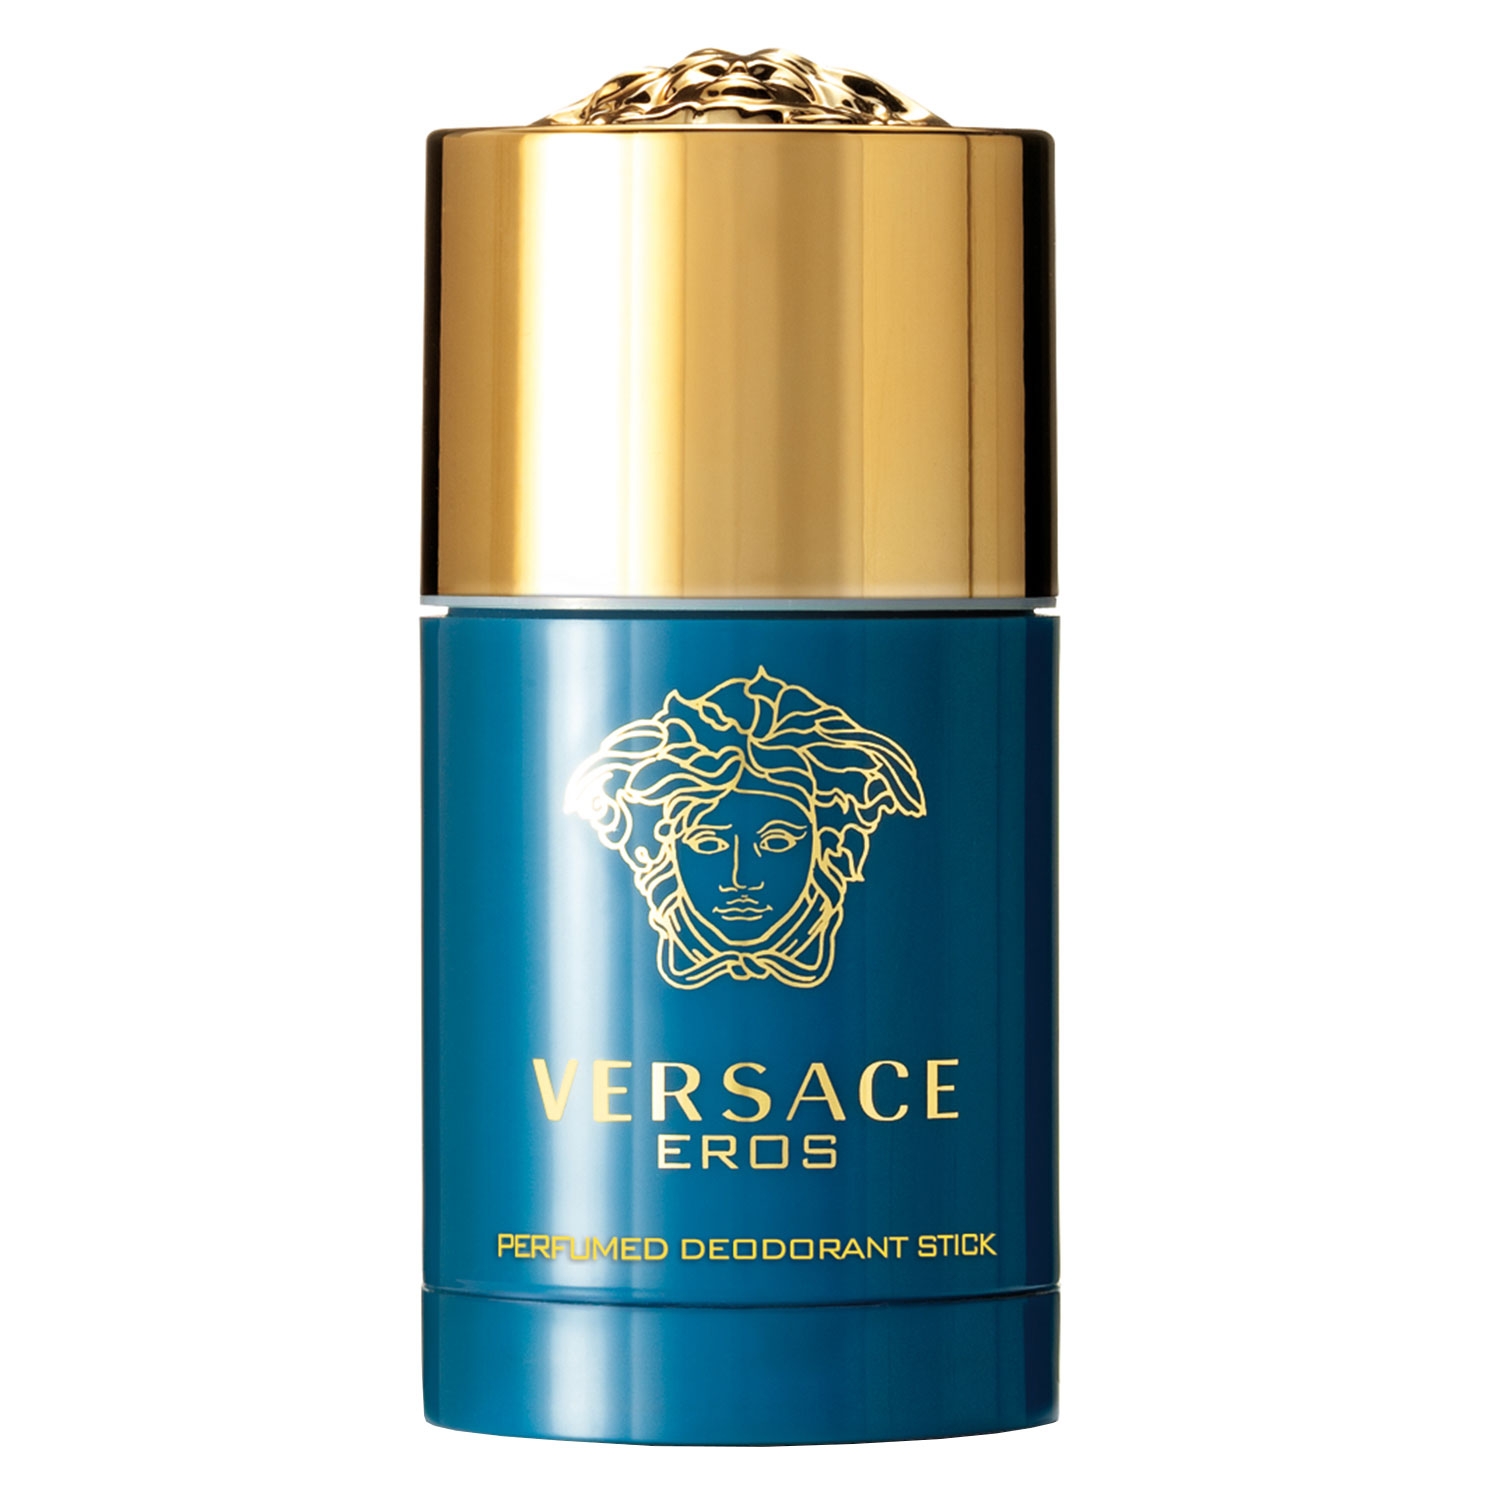 Product image from Versace Eros - Deodorant Stick